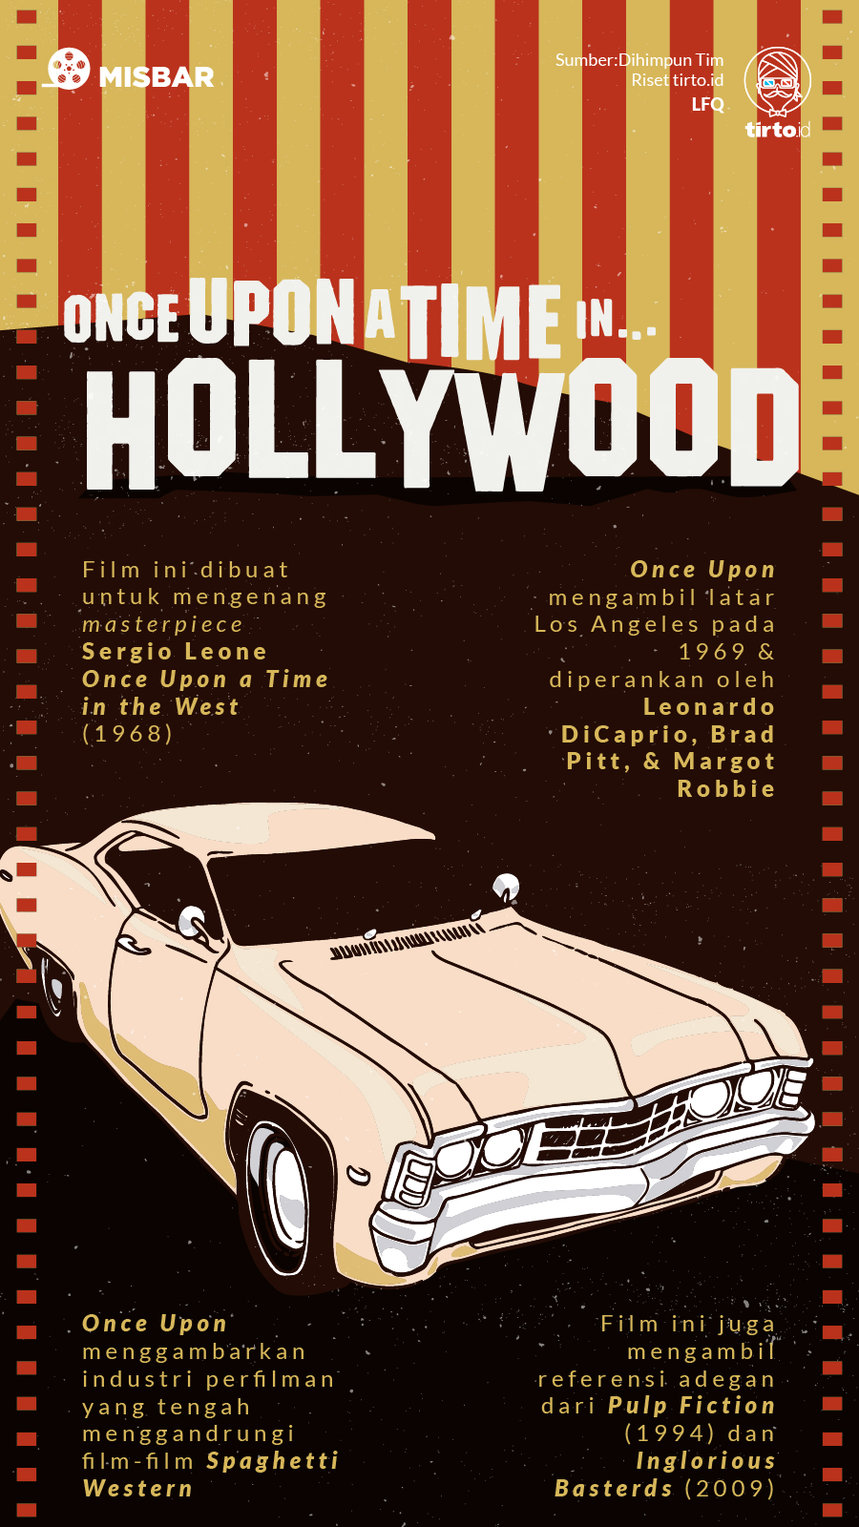 Infografik Misbar Once Upon a Time in Hollywood